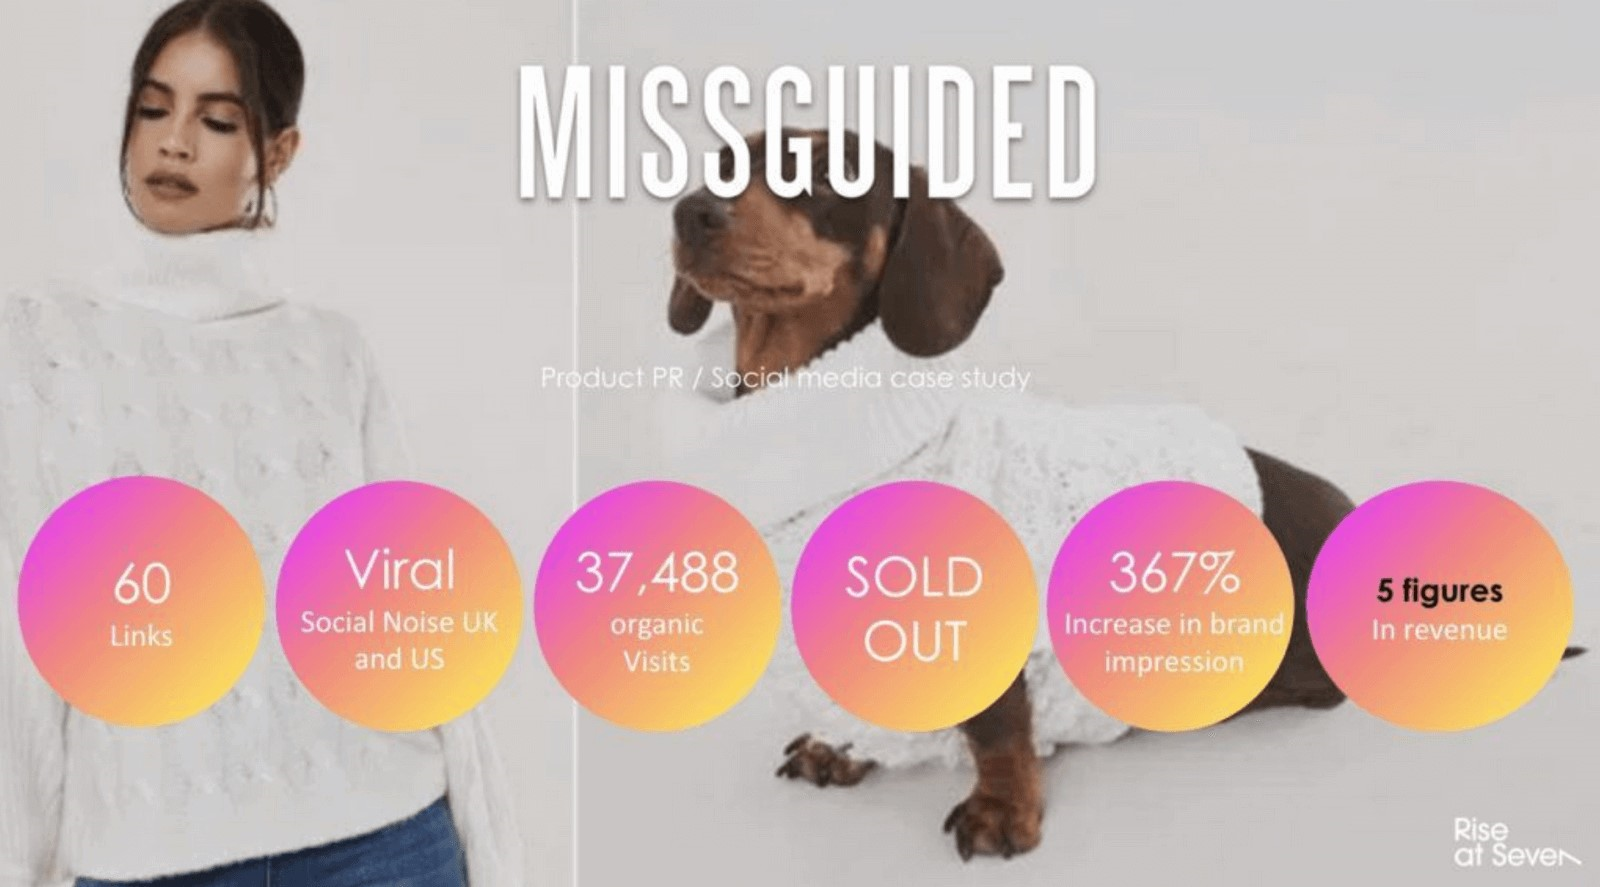 Results from Misguided’s PR campaign